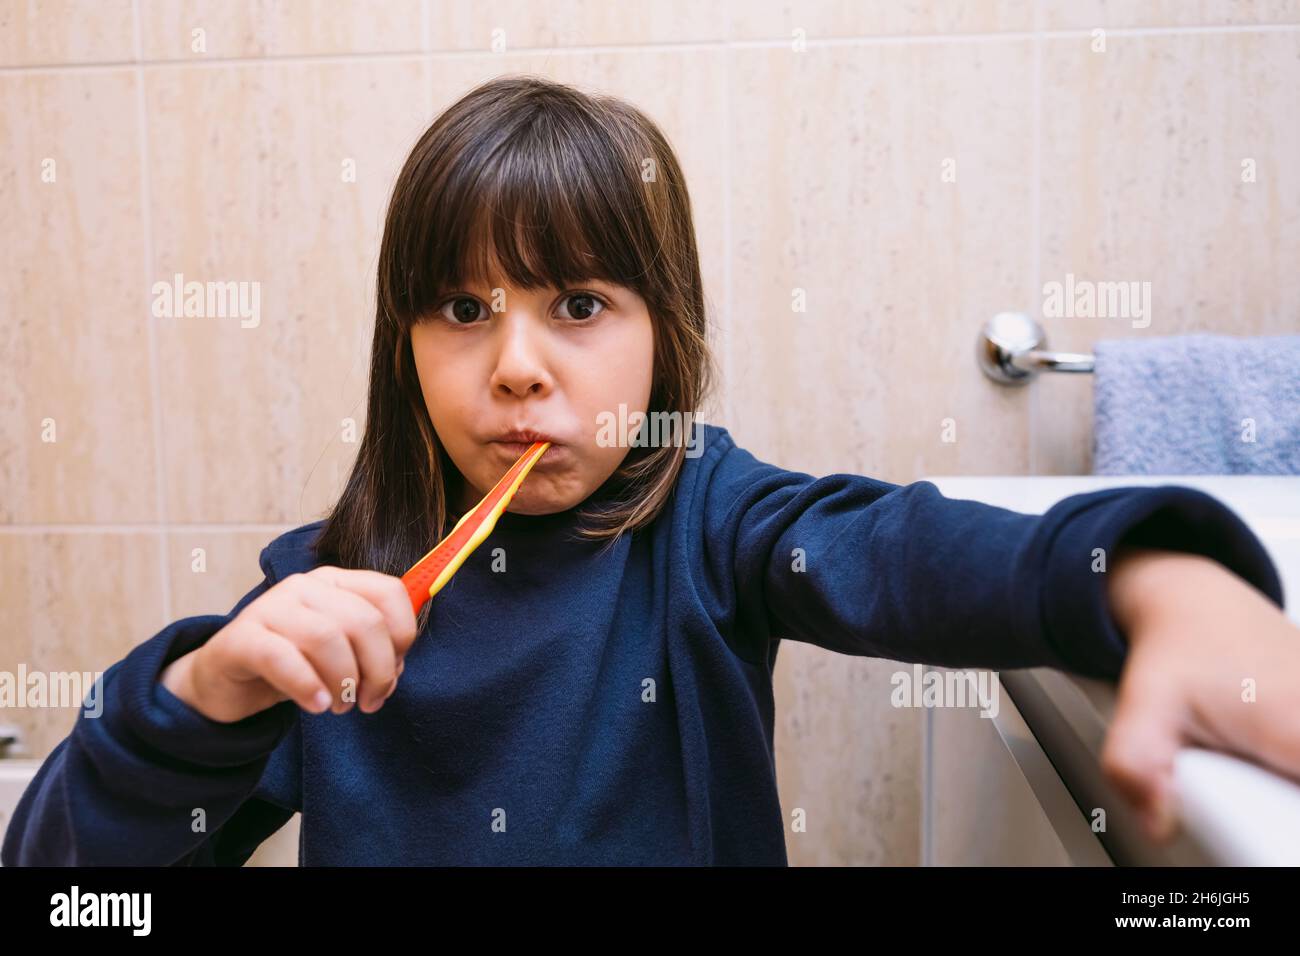 Little girl in dark blue sweatshirt, brushing her teeth, in the bathroom. Tooth brushing, hygiene and childhood concept. Stock Photo